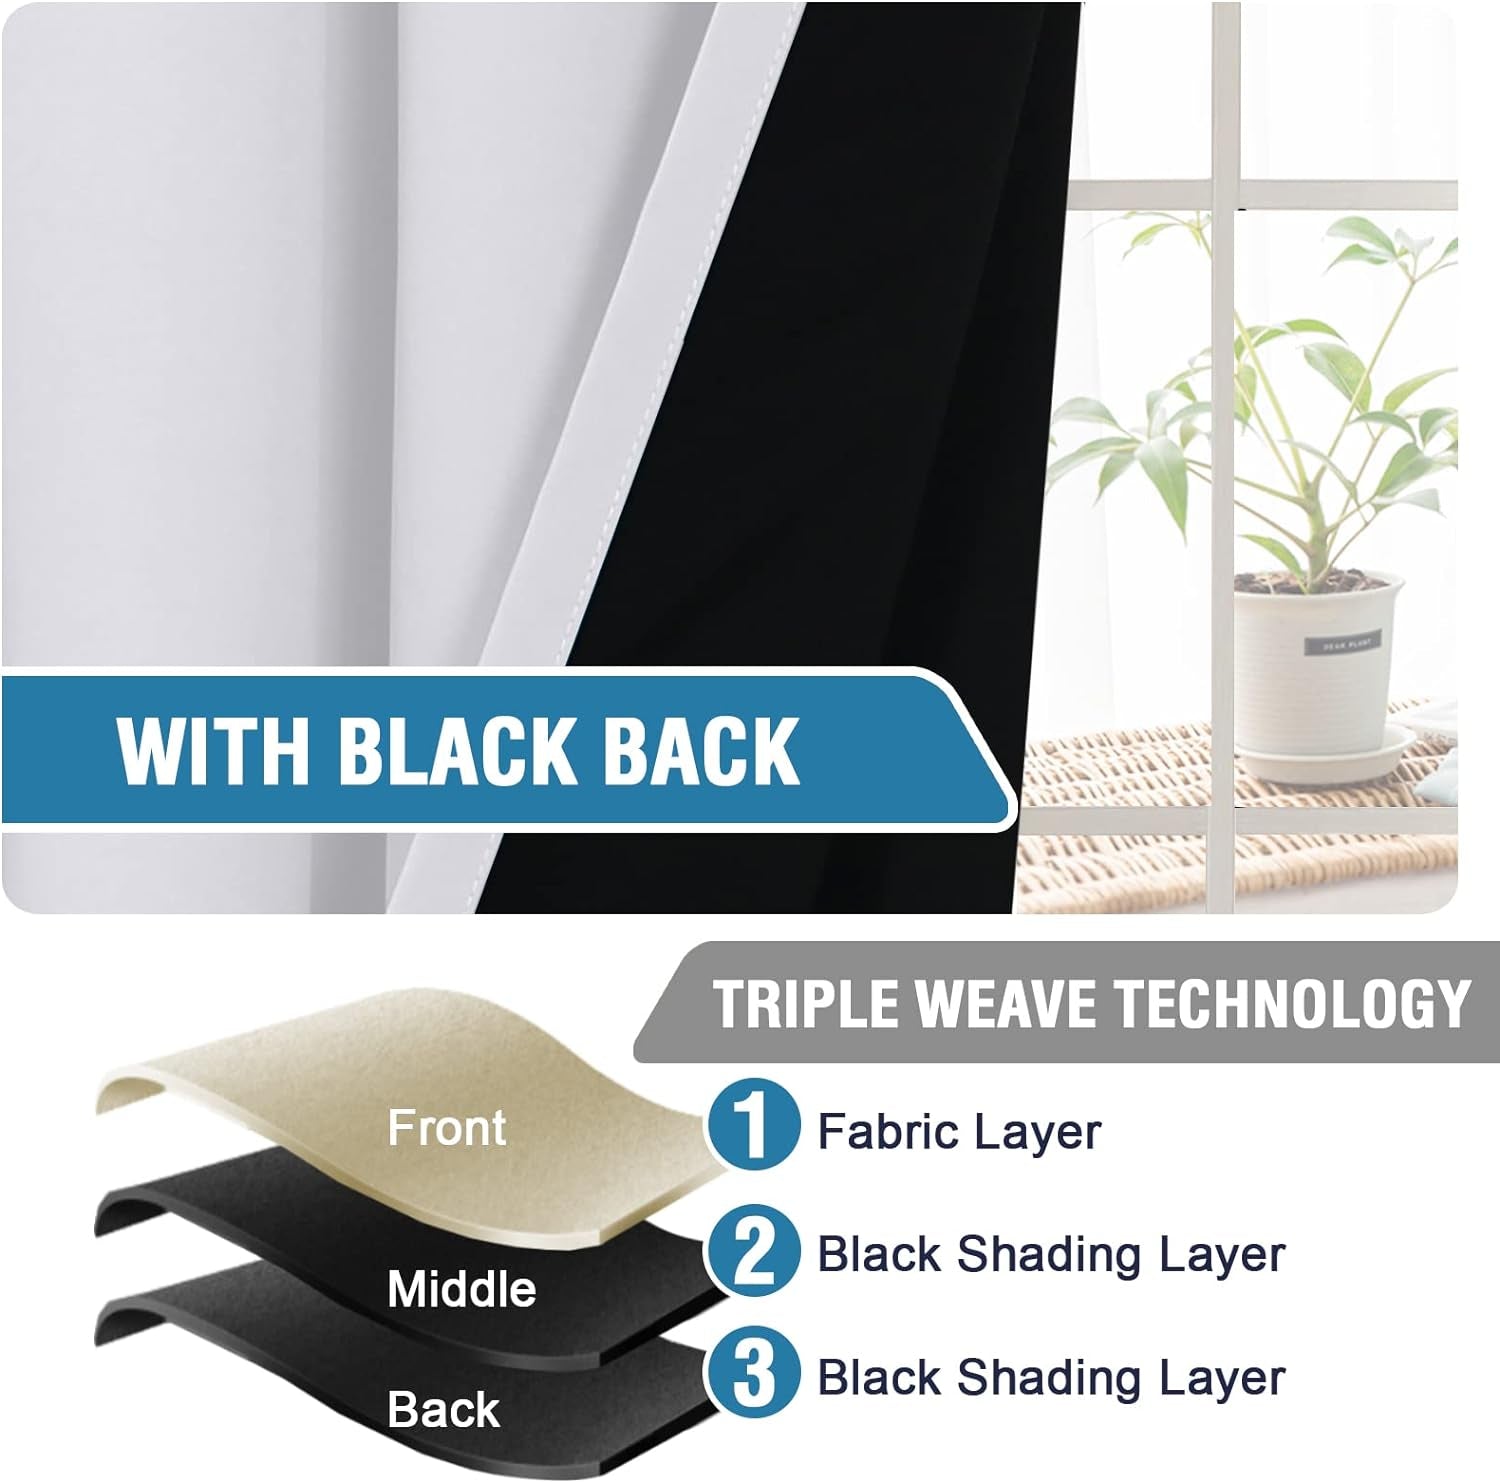 H.VERSAILTEX 100% Blackout Tie up Curtains for Bedroom Thermal Insulated Kitchen Curtains 45 Inches Long Rod Pocket Blackout Curtains for Small Window / Bathroom with Black Liner, White 42"W X 45"L  H.VERSAILTEX   